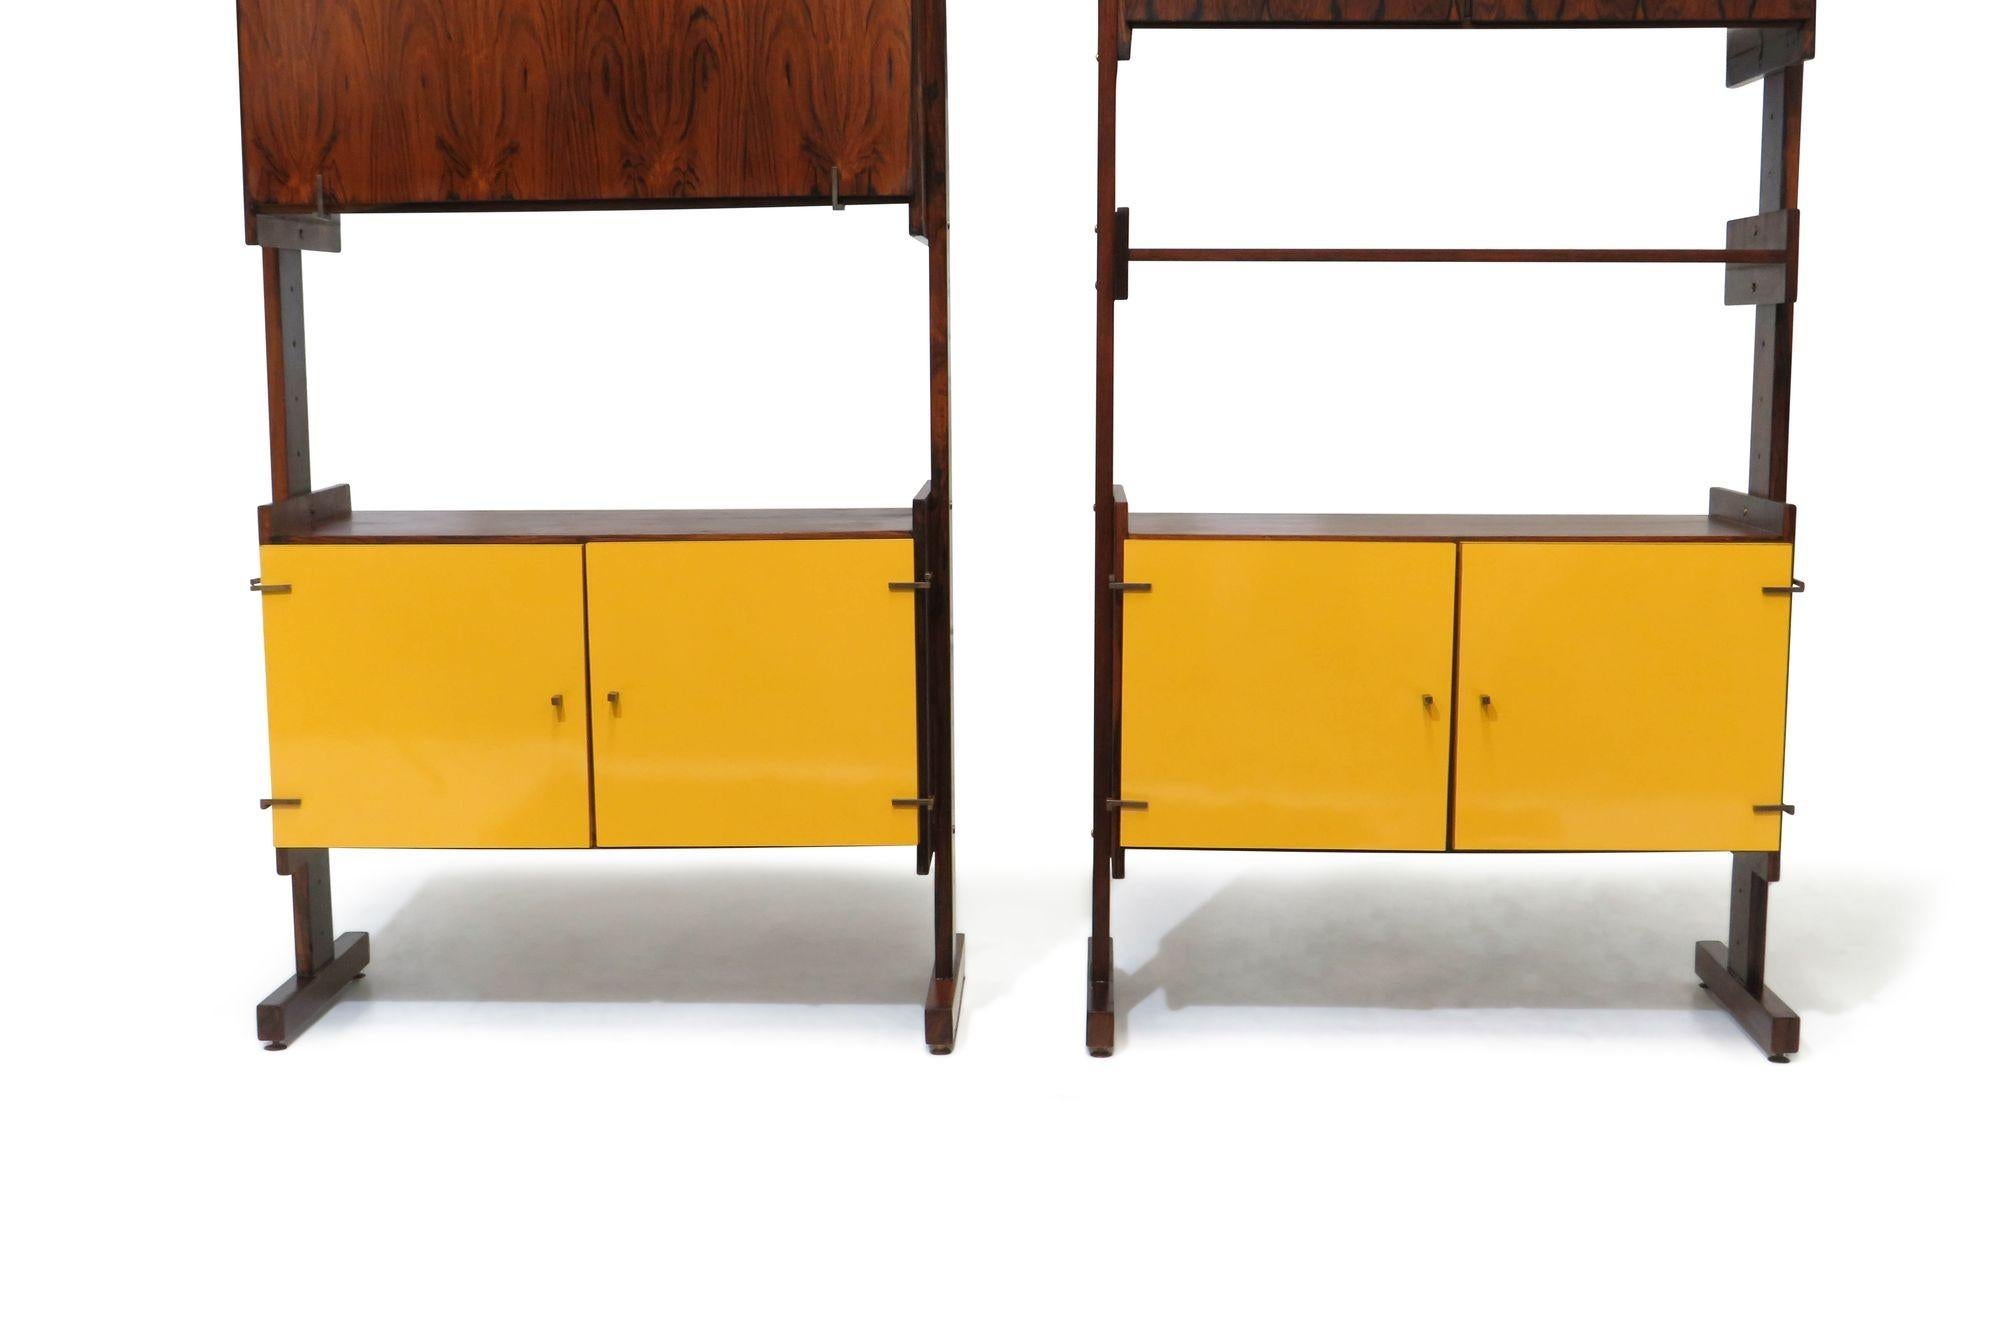 Brazilian Brazil Rosewood Room Divider Bookcase or Wall Unit in Yellow